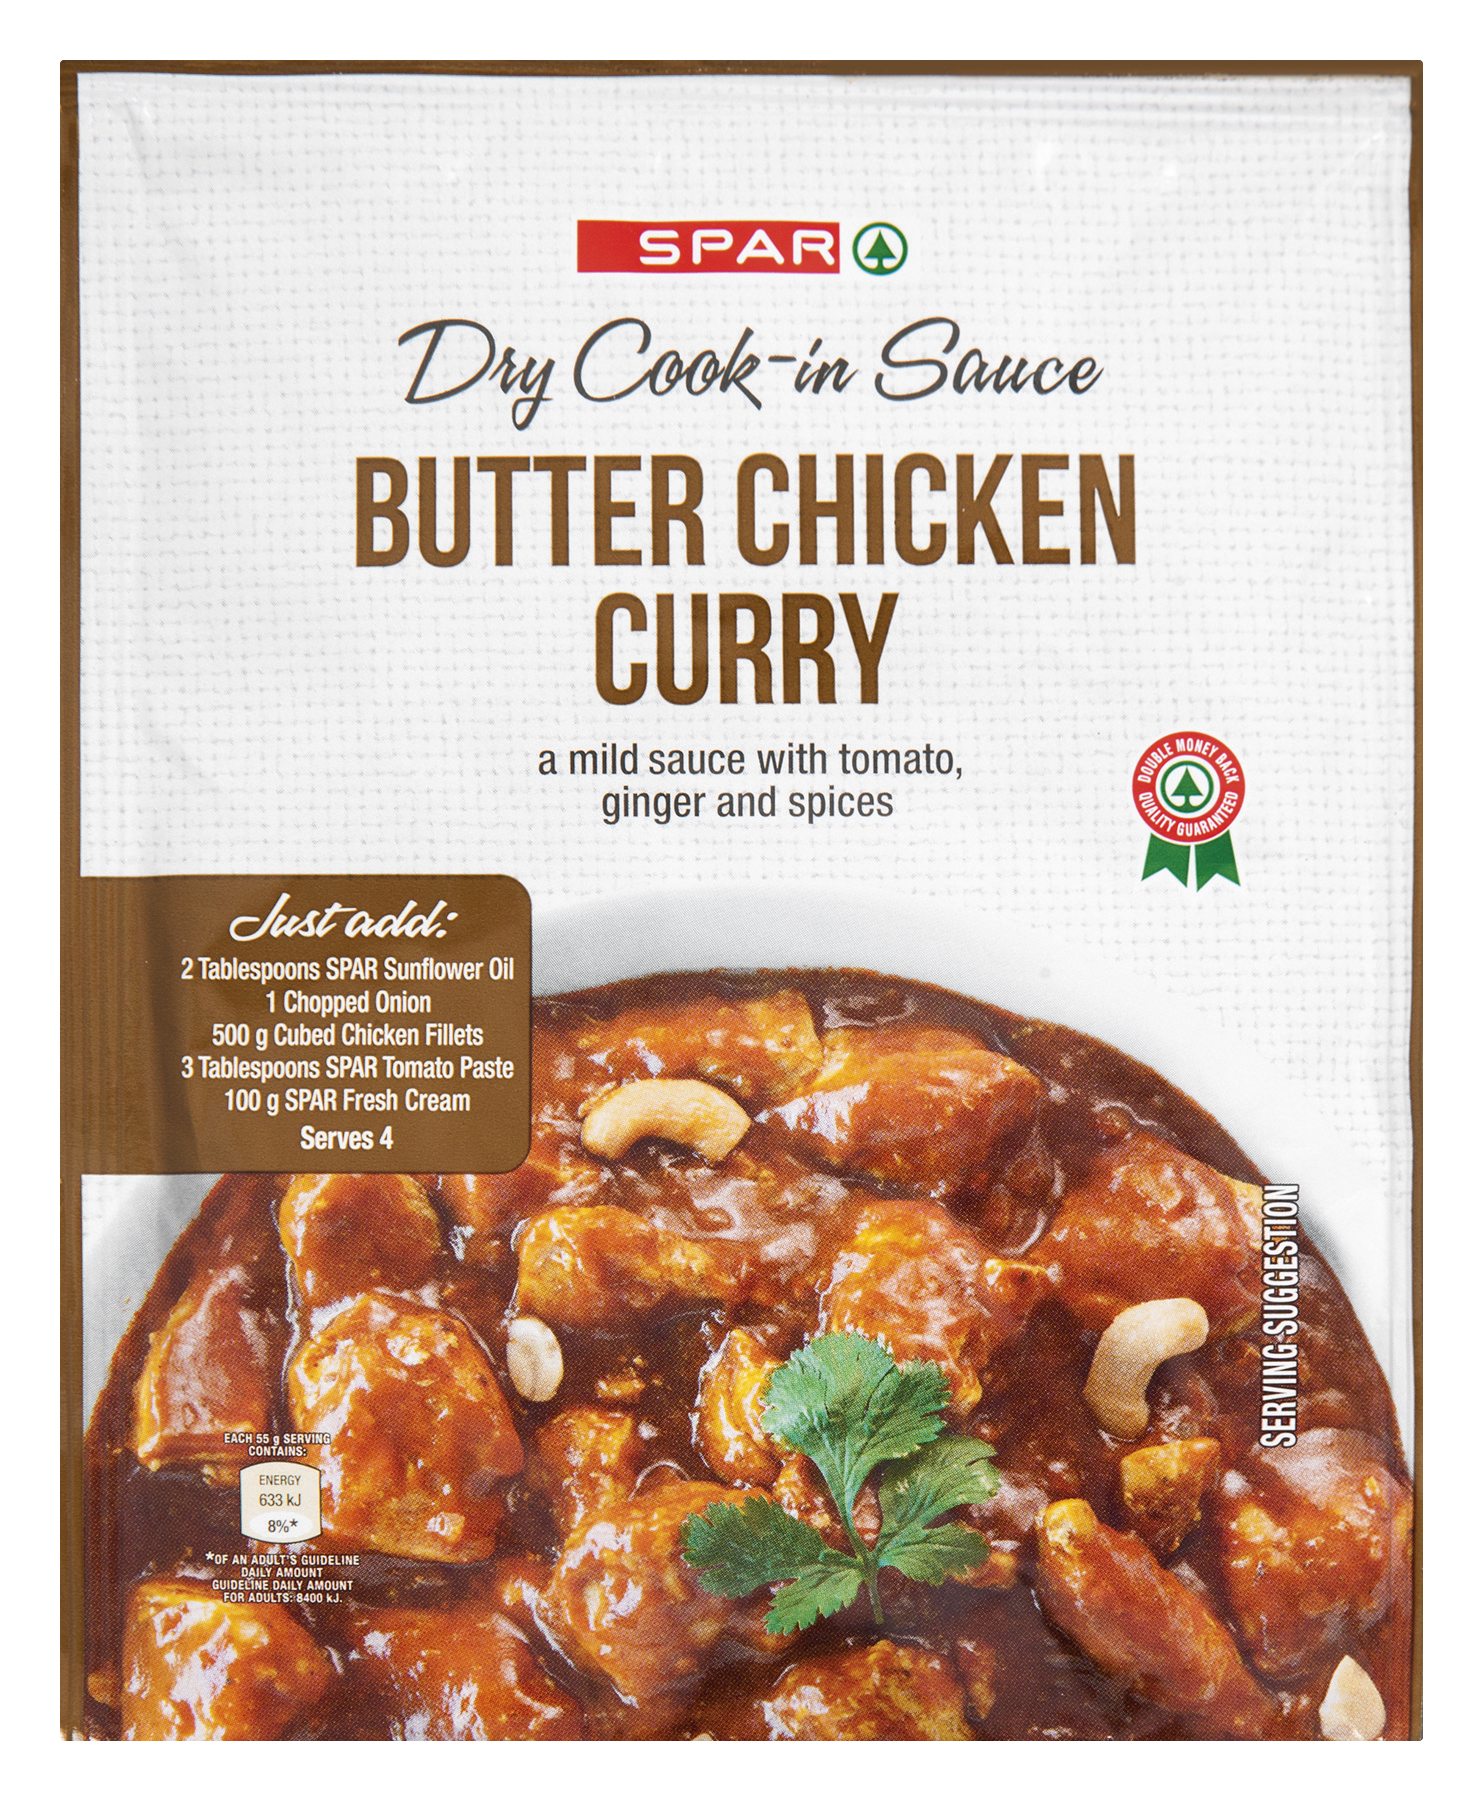 dry cook-in-sauce butter chicken  